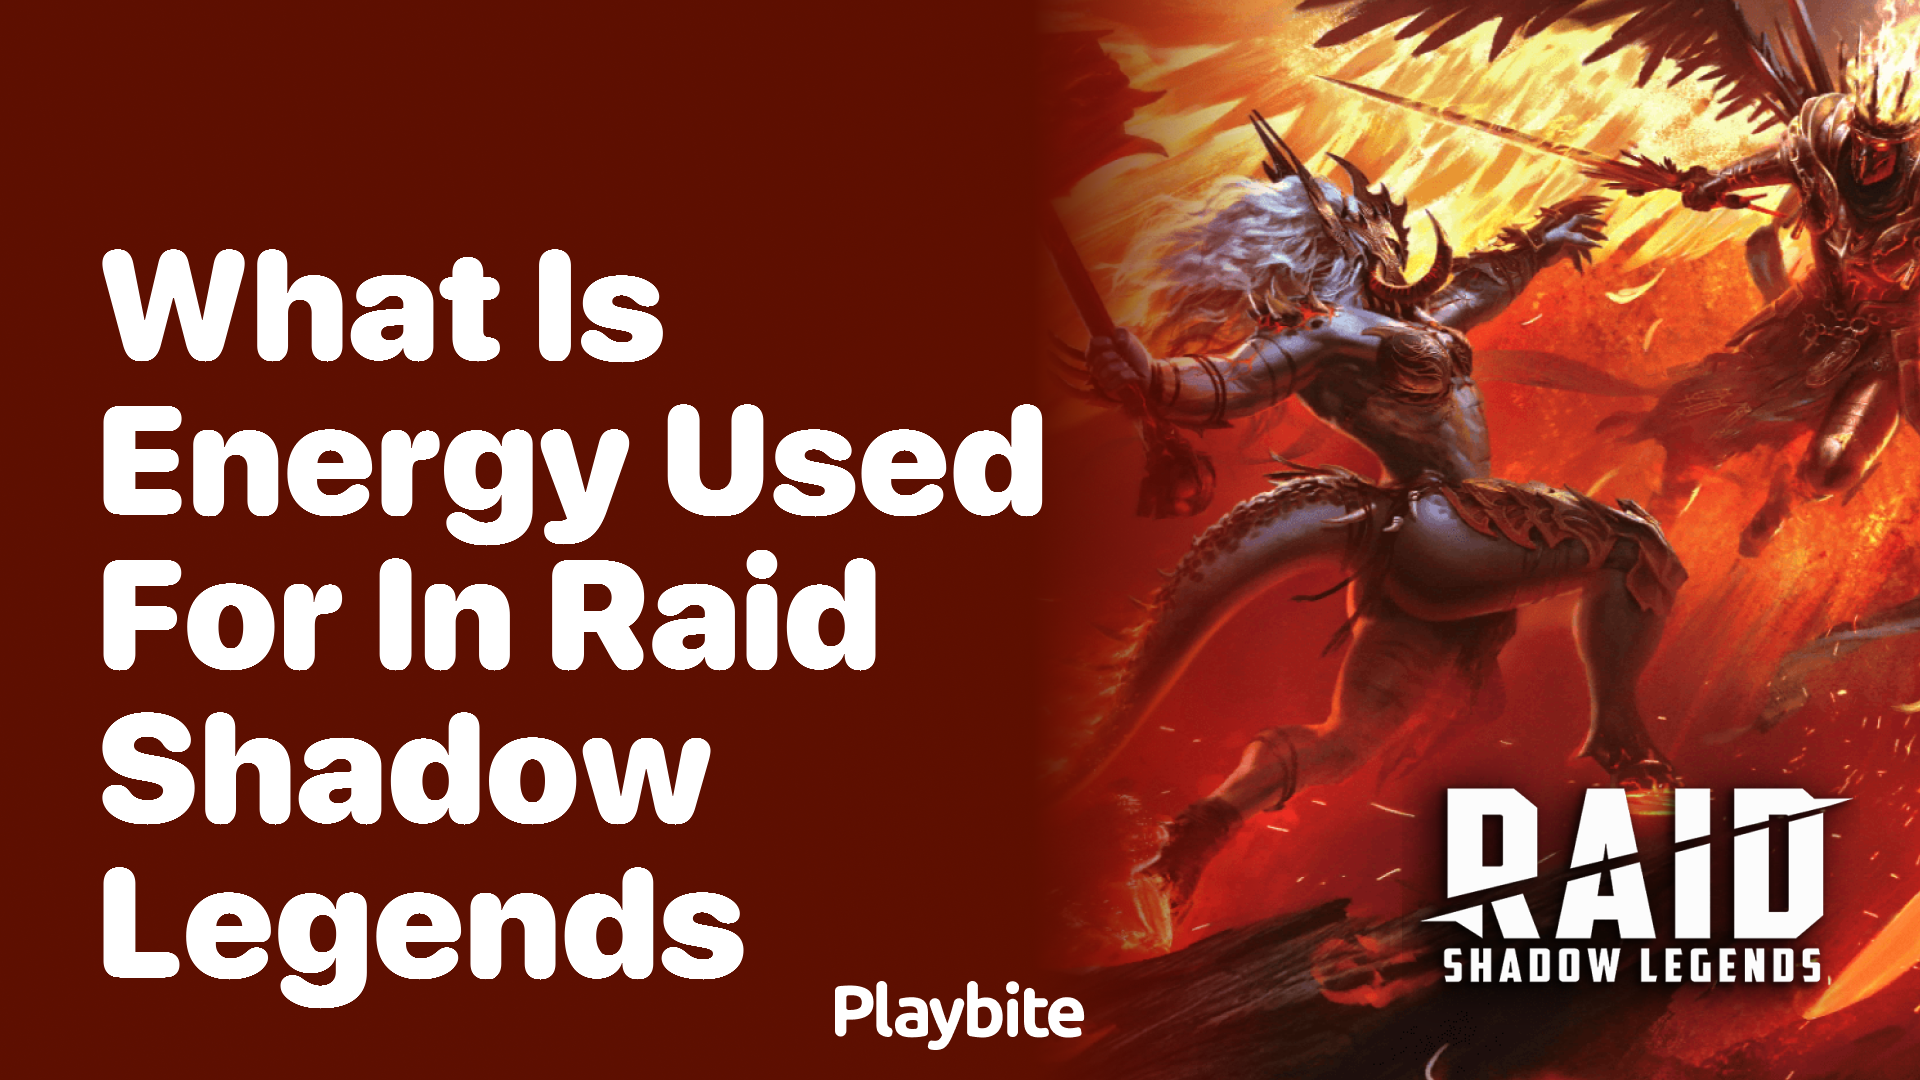 What is Energy Used for in Raid Shadow Legends?